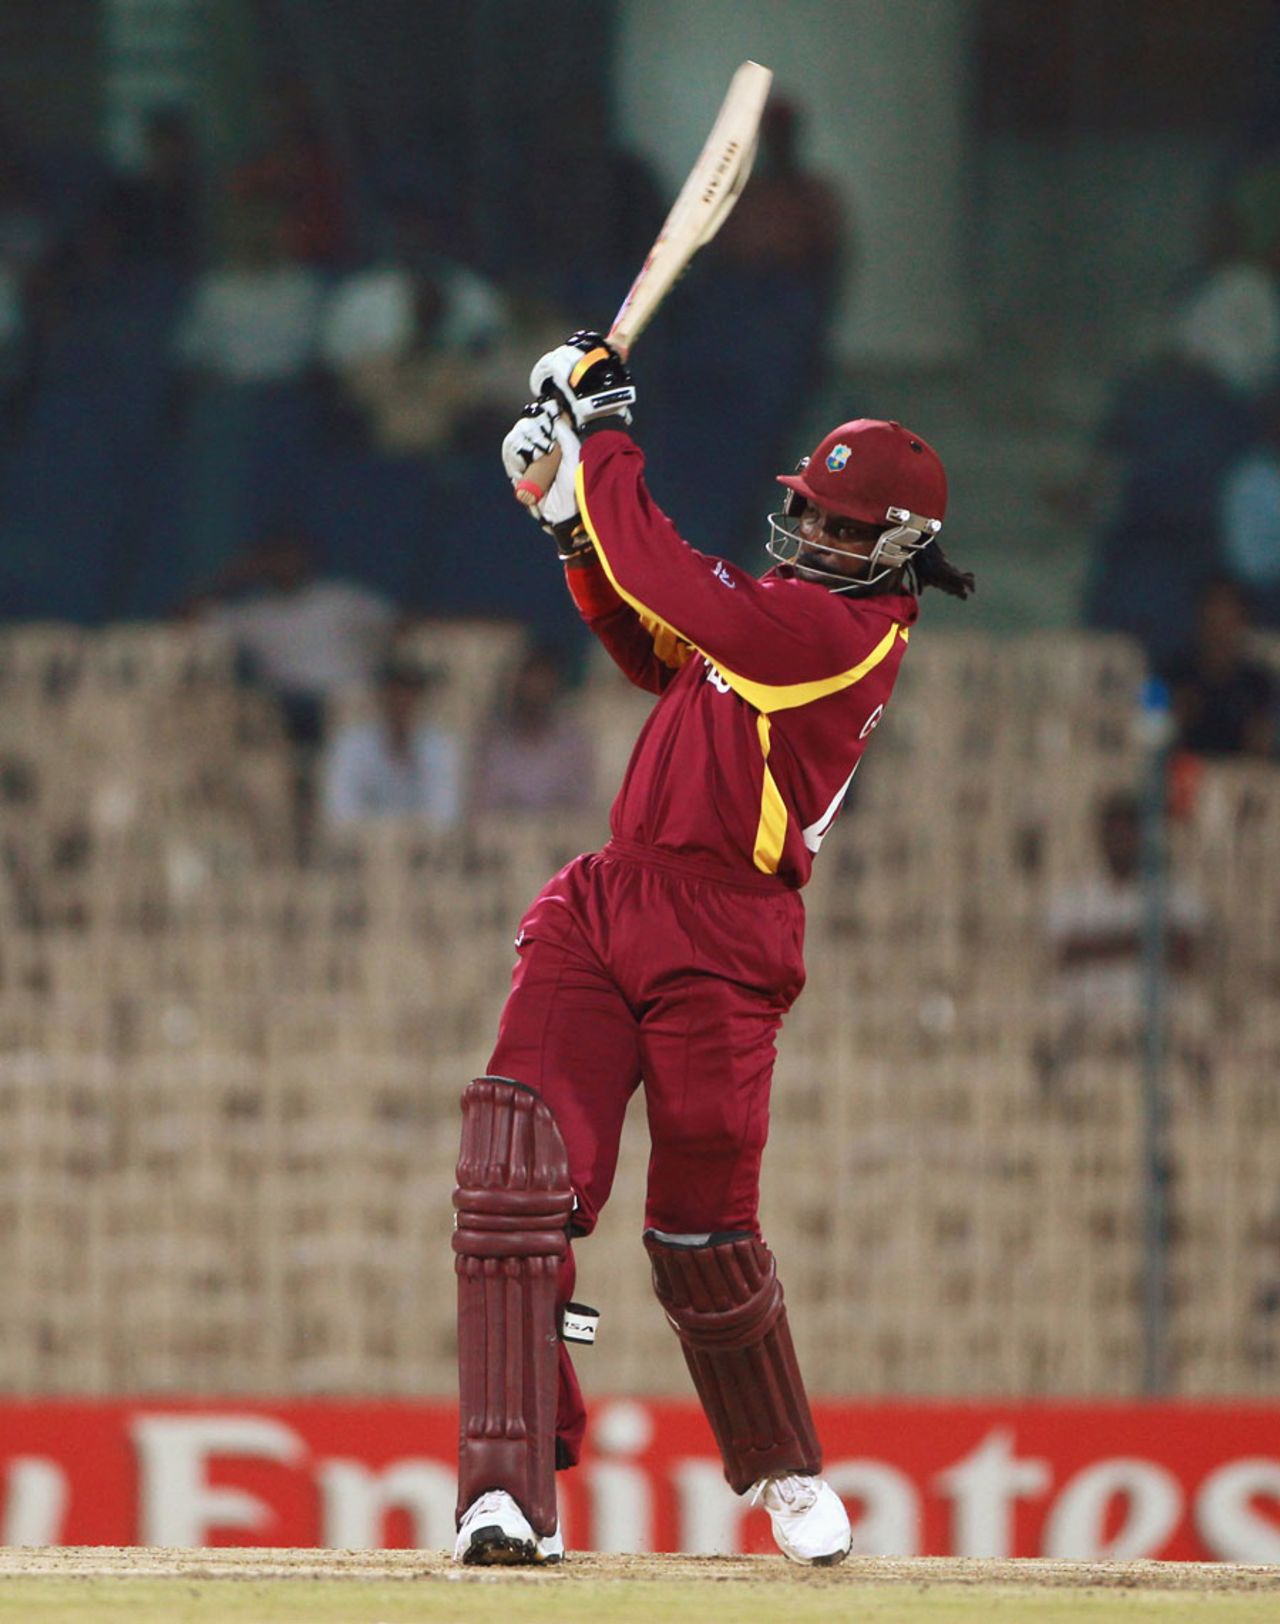 Chris Gayle launched West Indies' innings in blistering fashion, England v West Indies, World Cup, Group B, March 17, 2011